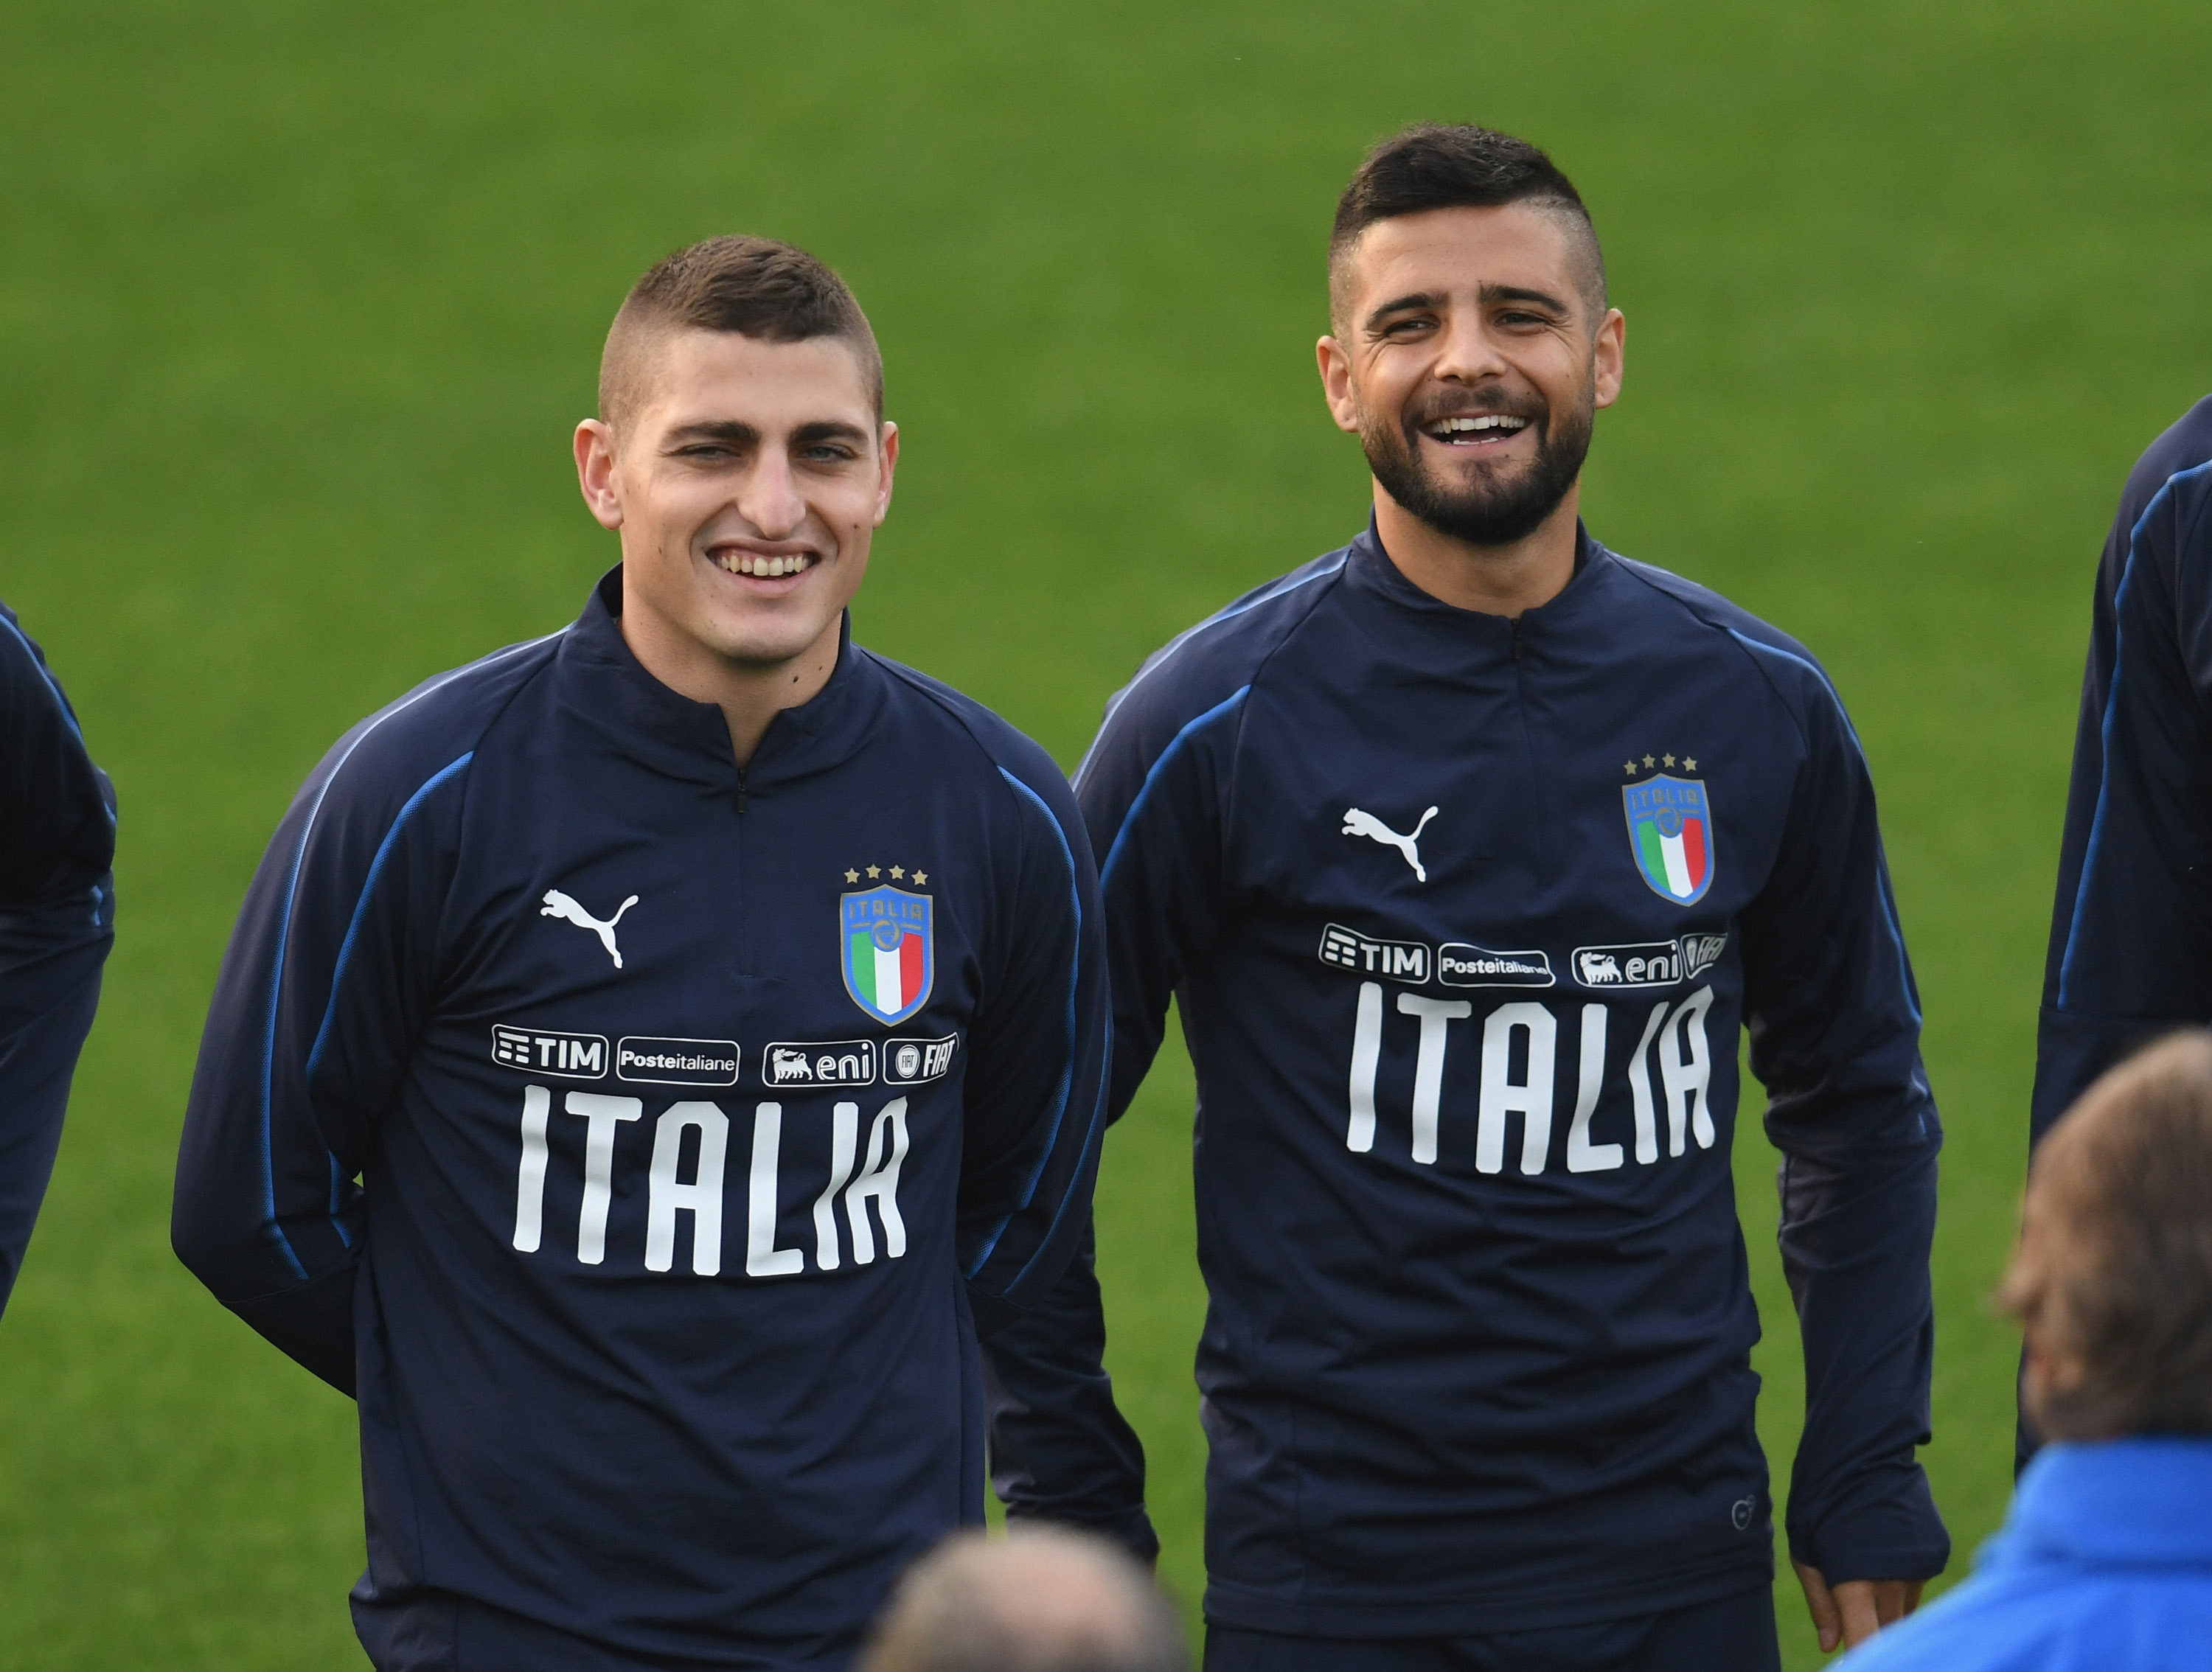 FLORENCE, ITALY - NOVEMBER 13:  Lorenzo Insigne(R) and Marco Verratti of Italy smile during a training session at Centro Tecnico Federale di Coverciano on November 13, 2018 in Florence, Italy.  (Photo by Claudio Villa/Getty Images)